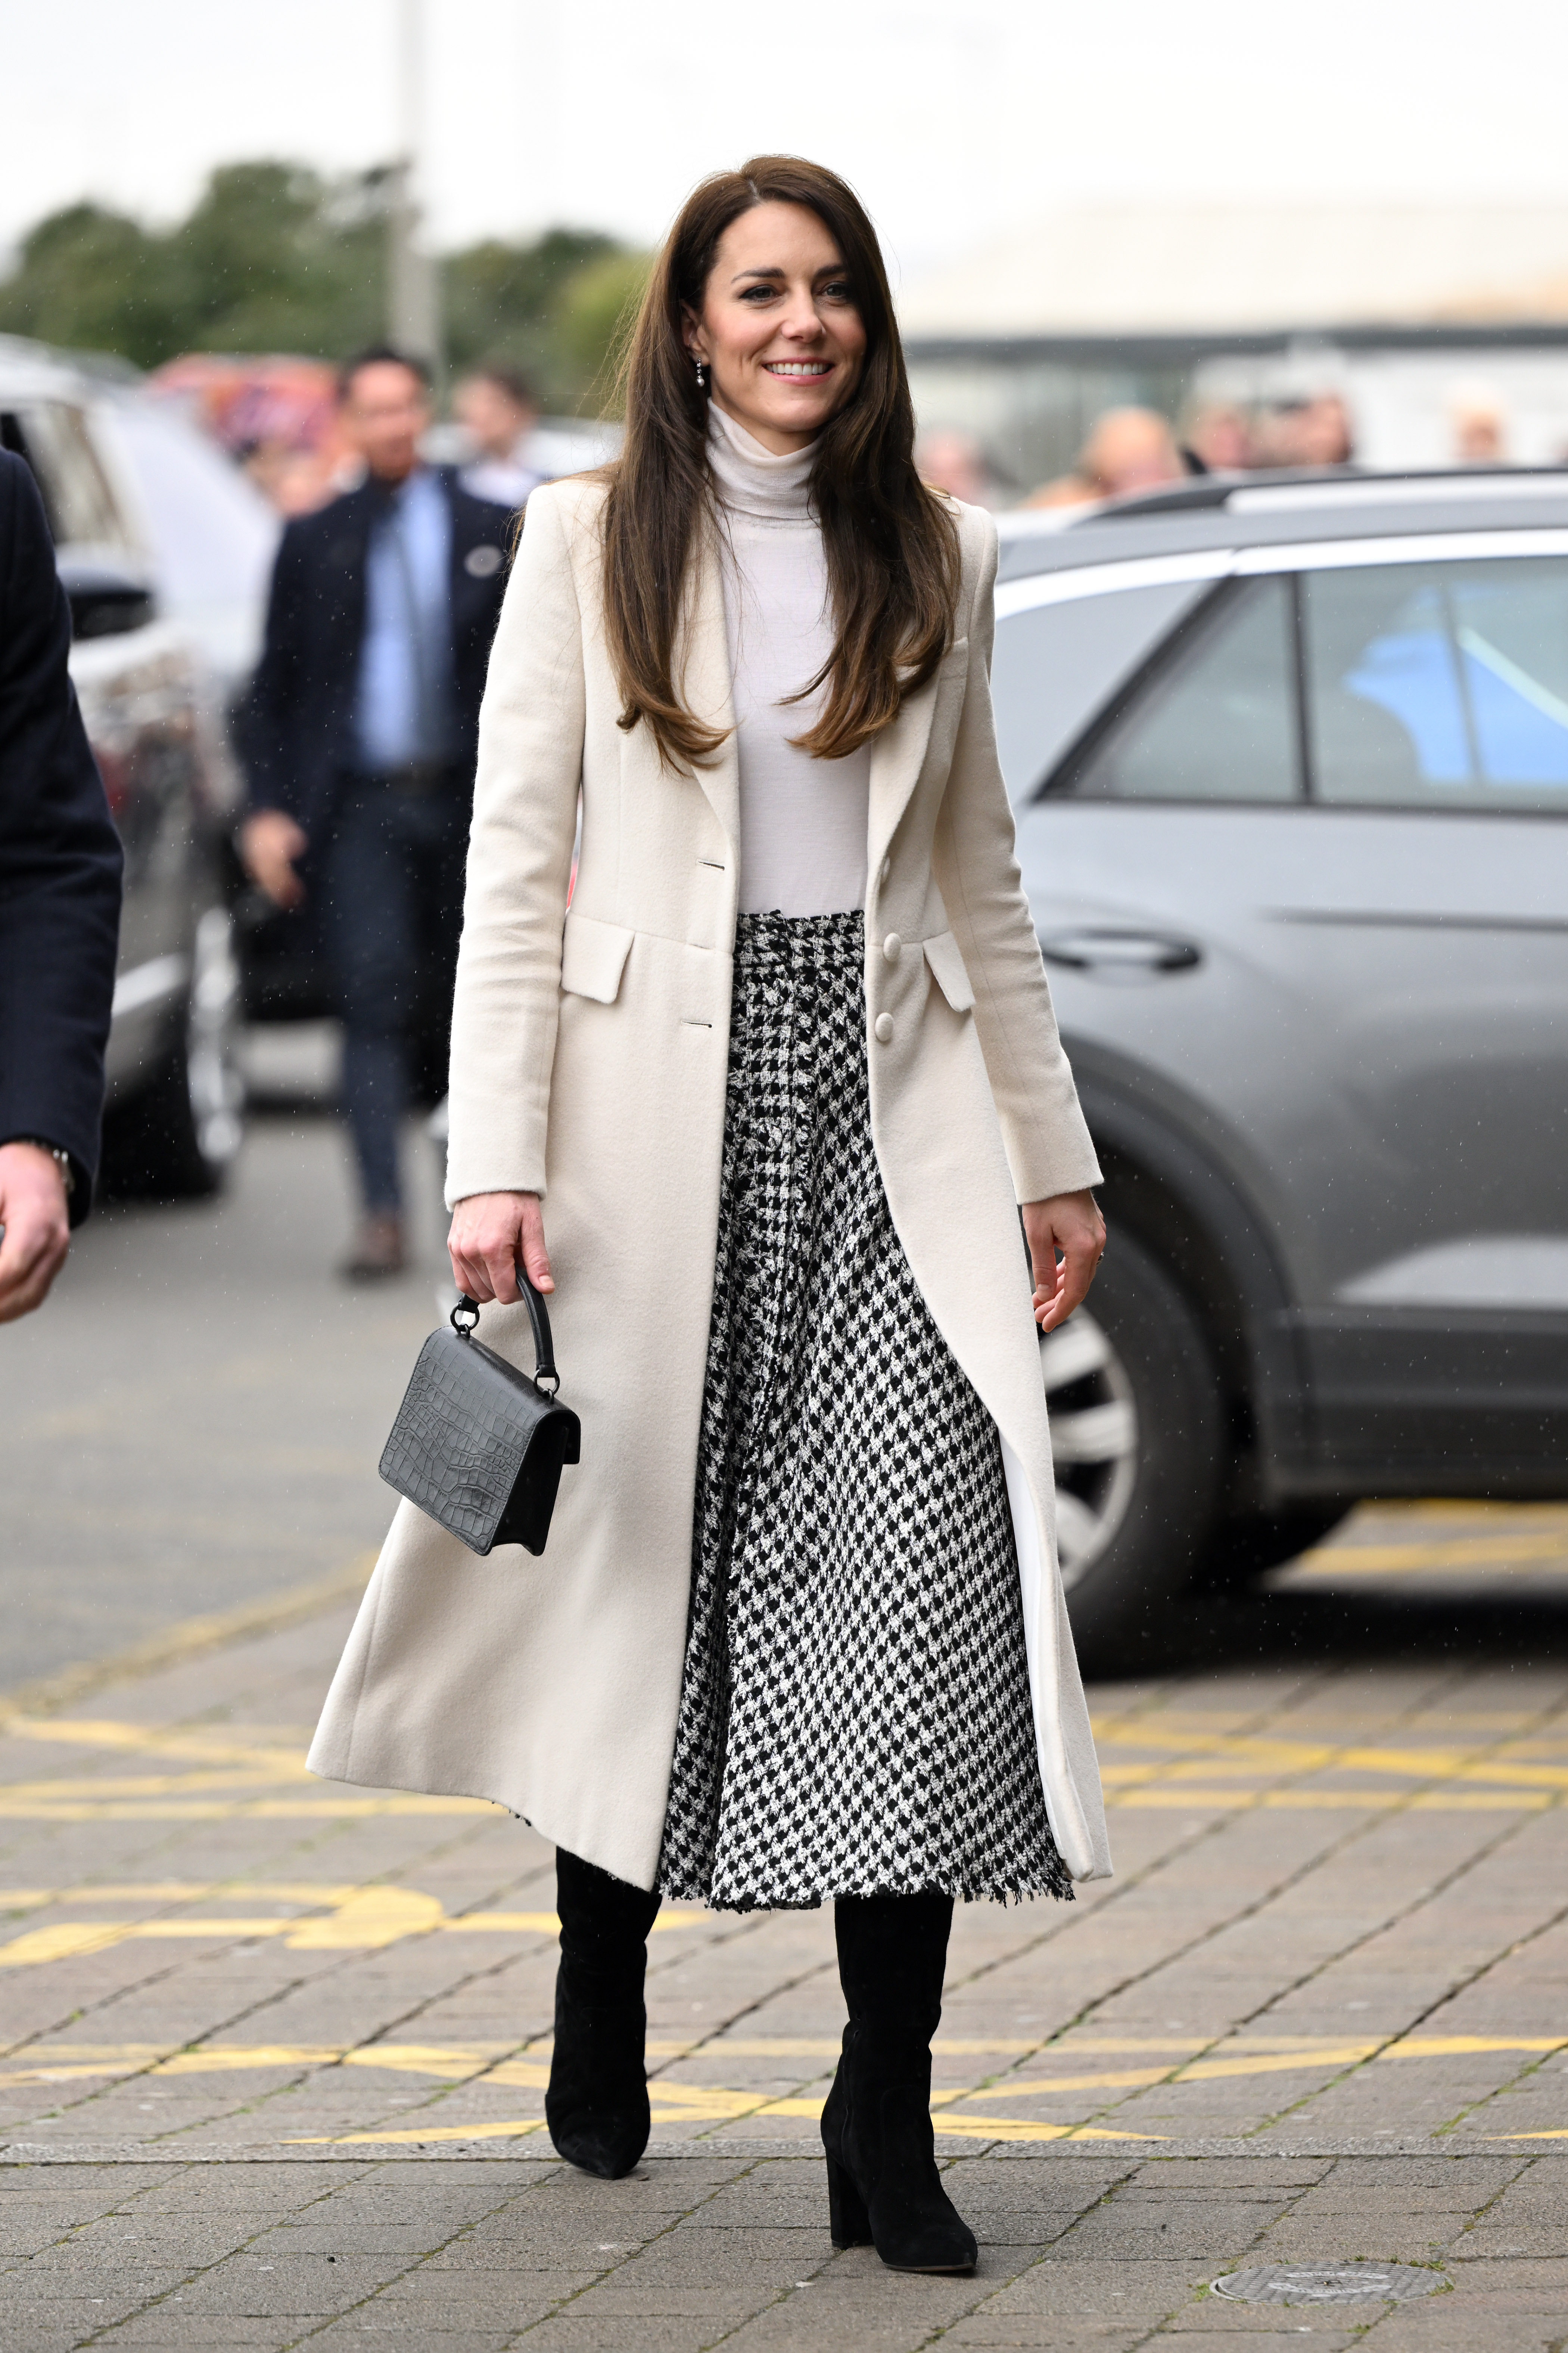 Kate Middleton upon arrival in Wales